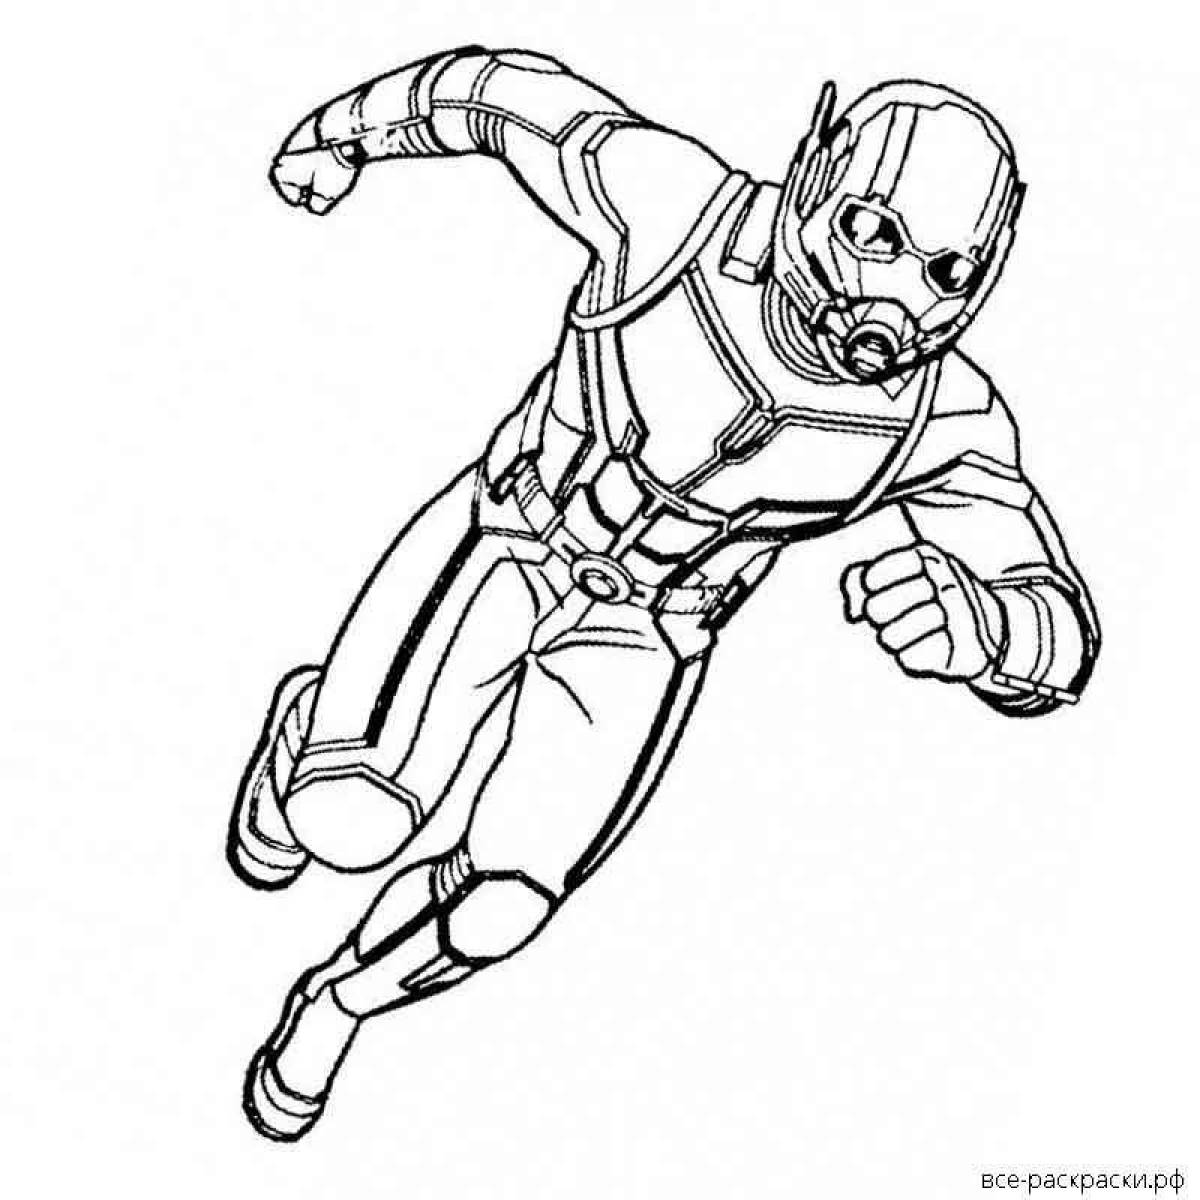 Ant-Man dynamic coloring page